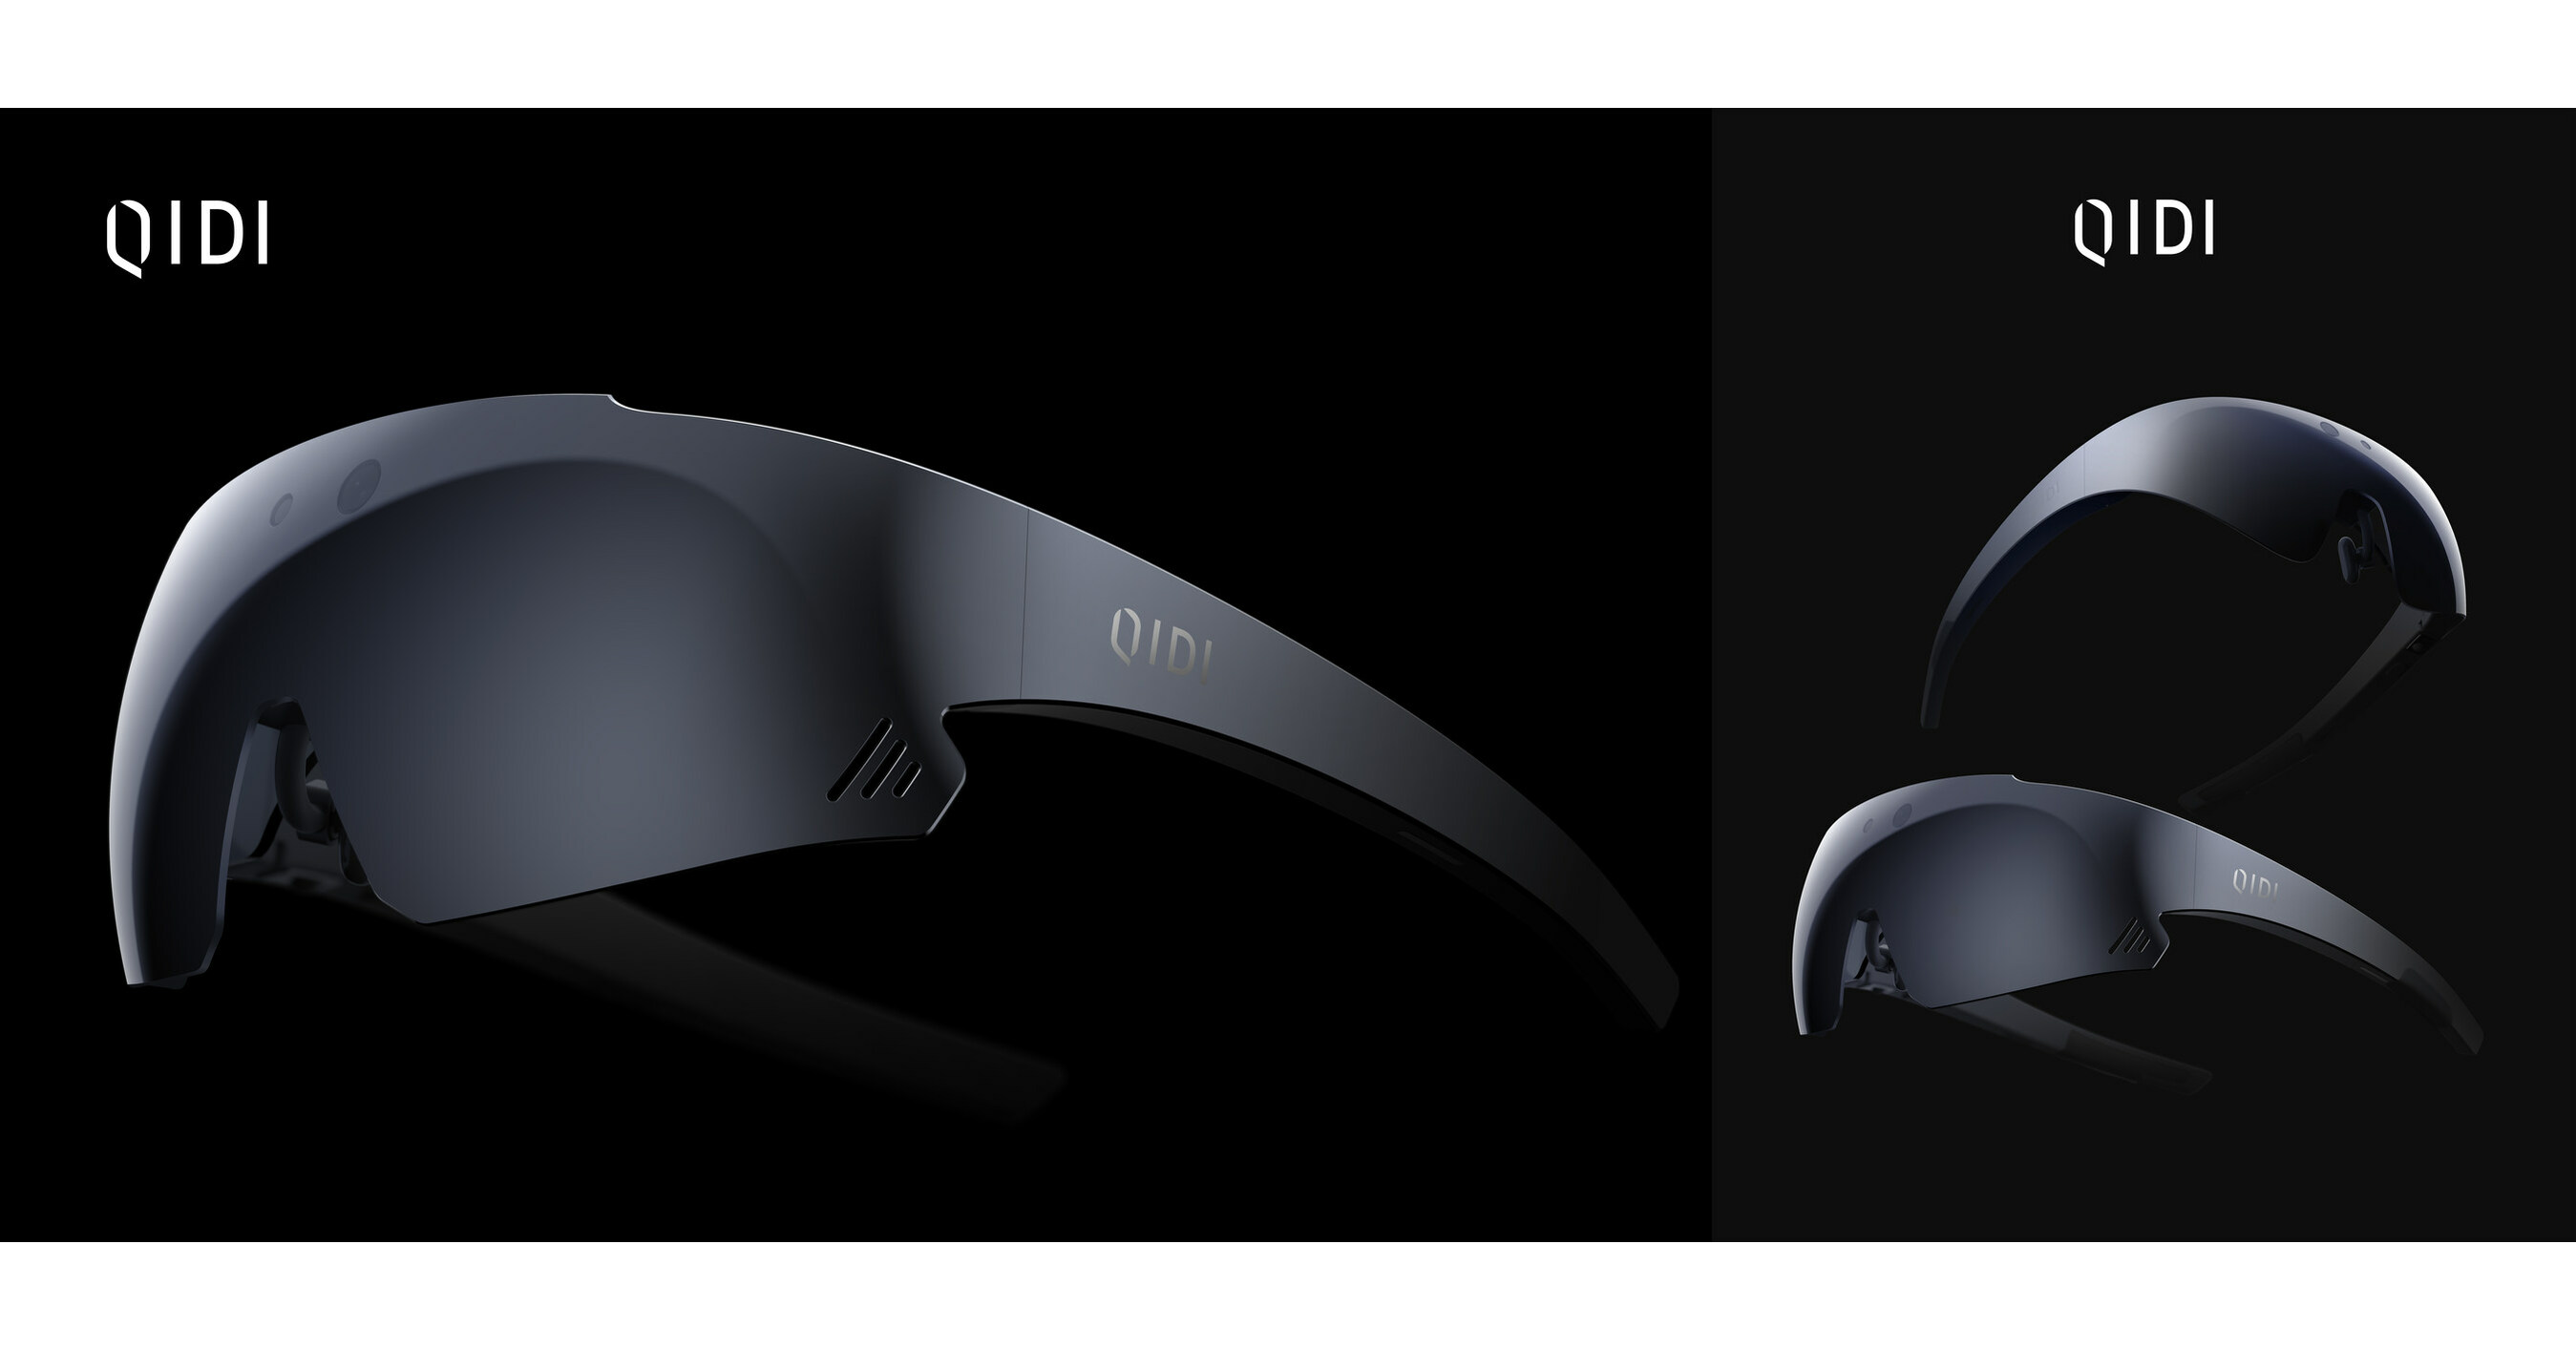 Free Your Hands, QIDI Vida Smart AR Glasses Lead the Way in New Sports Experience.